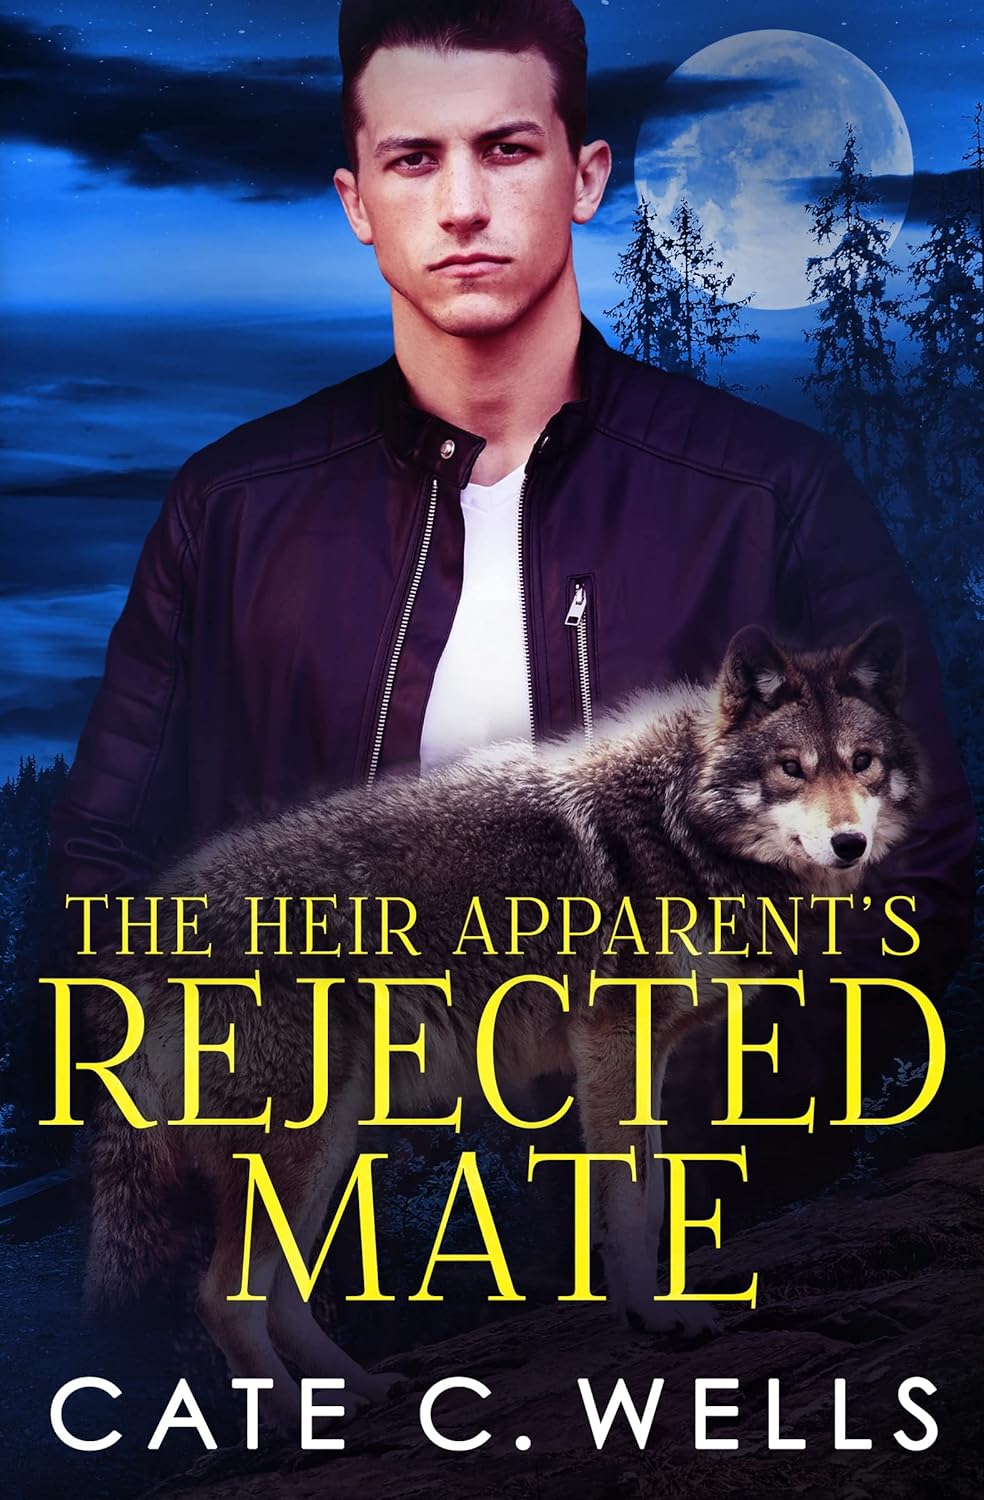 The Heir Apparent’s Rejected Mate (The Five Packs Book 2) by Cate C. Wells